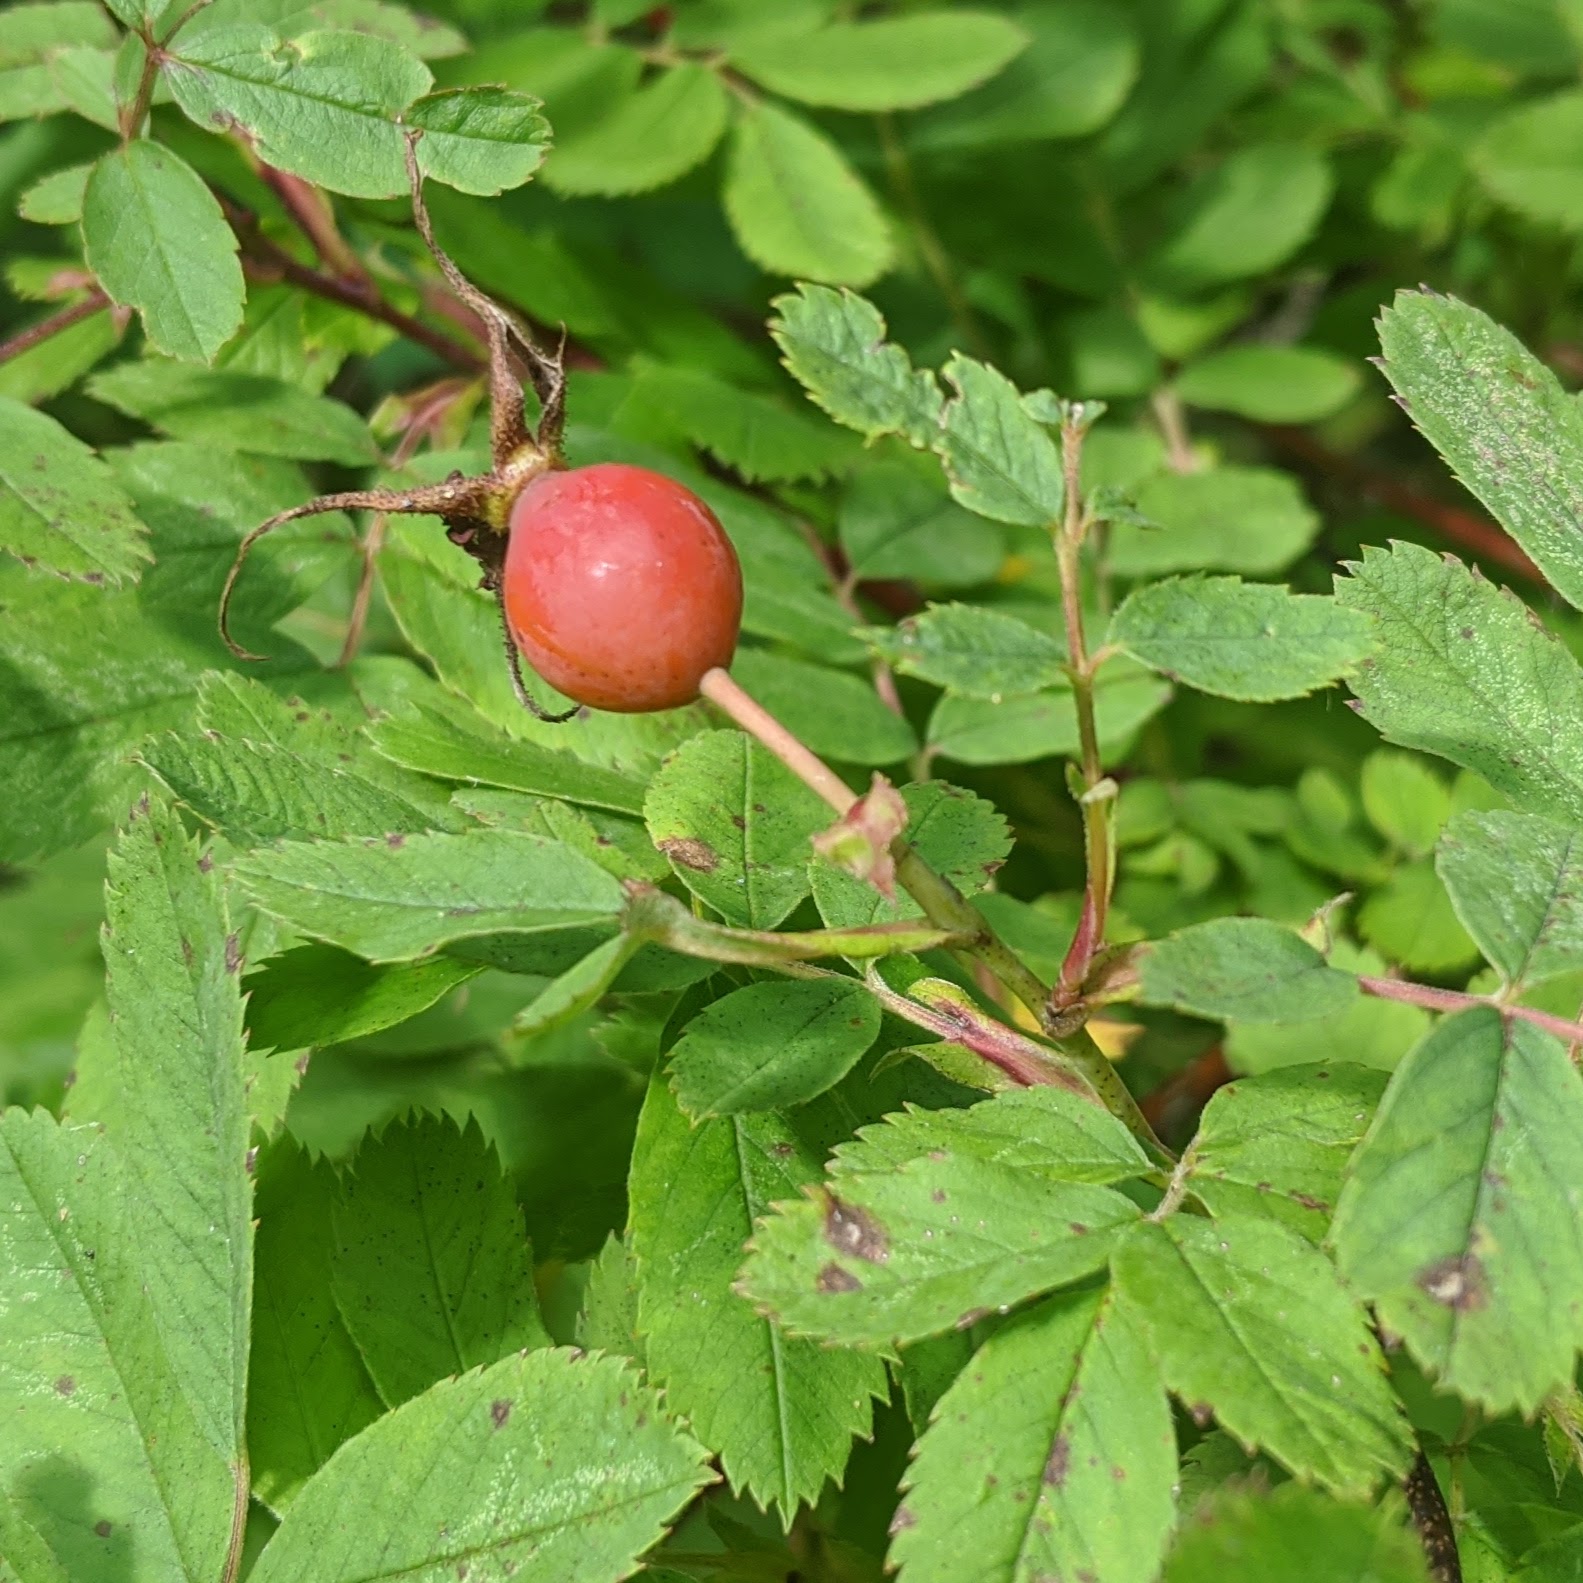 A red rose hip among lots of green leaves.